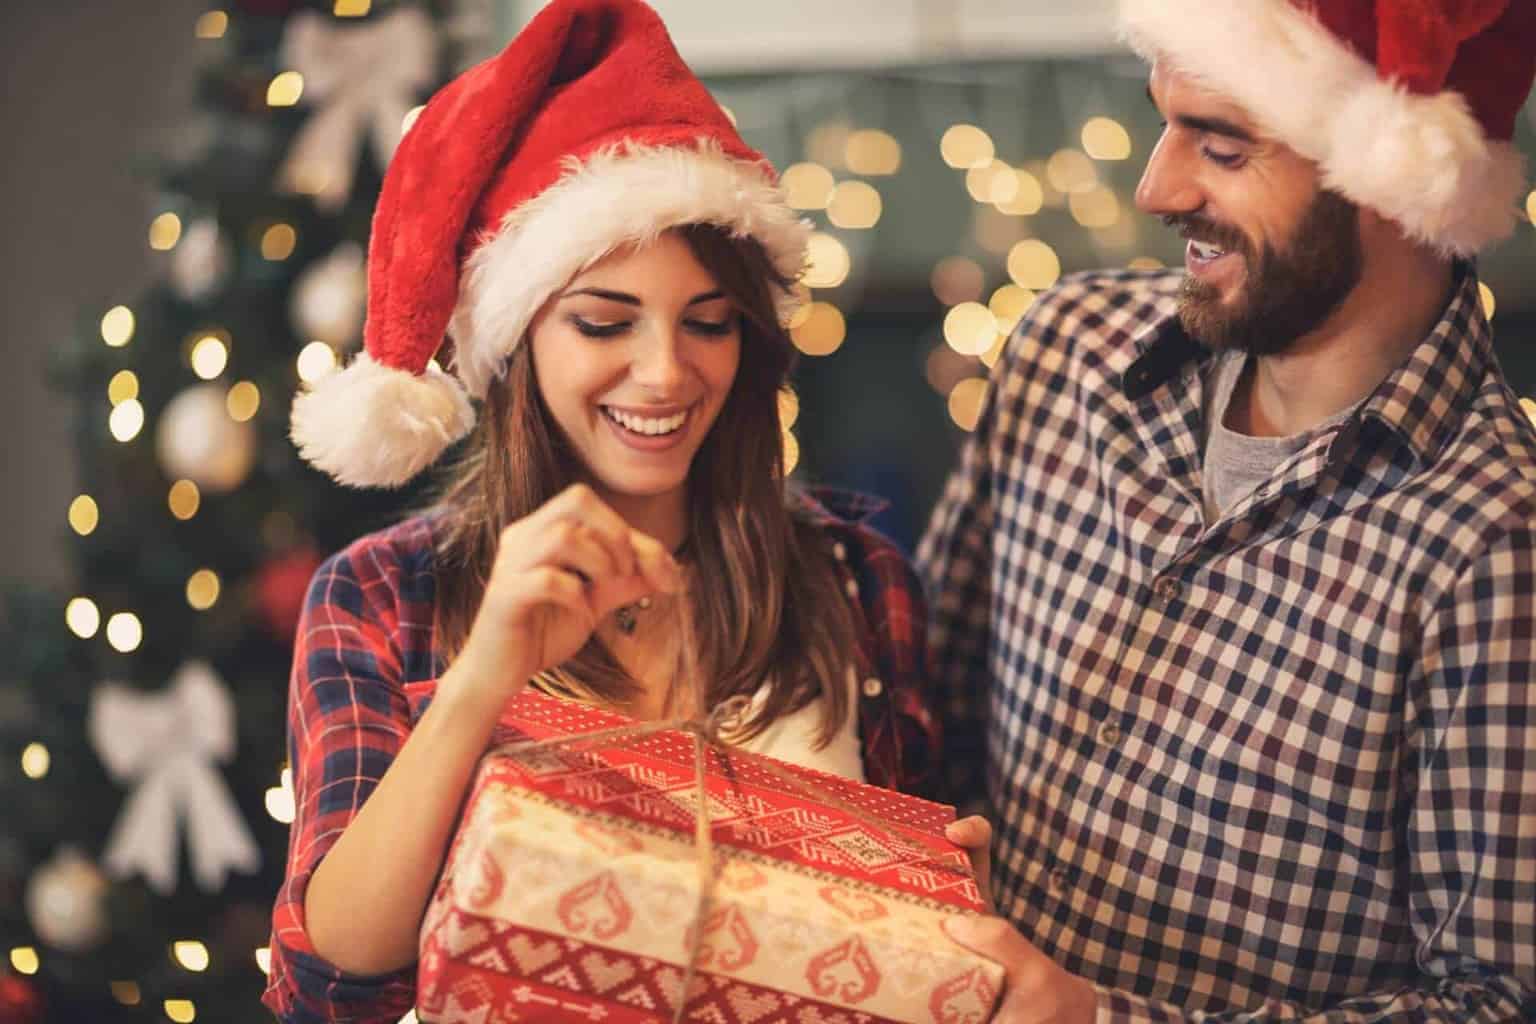 42 Christmas Gifts For Girlfriend  List of awesome gifts she'll love.